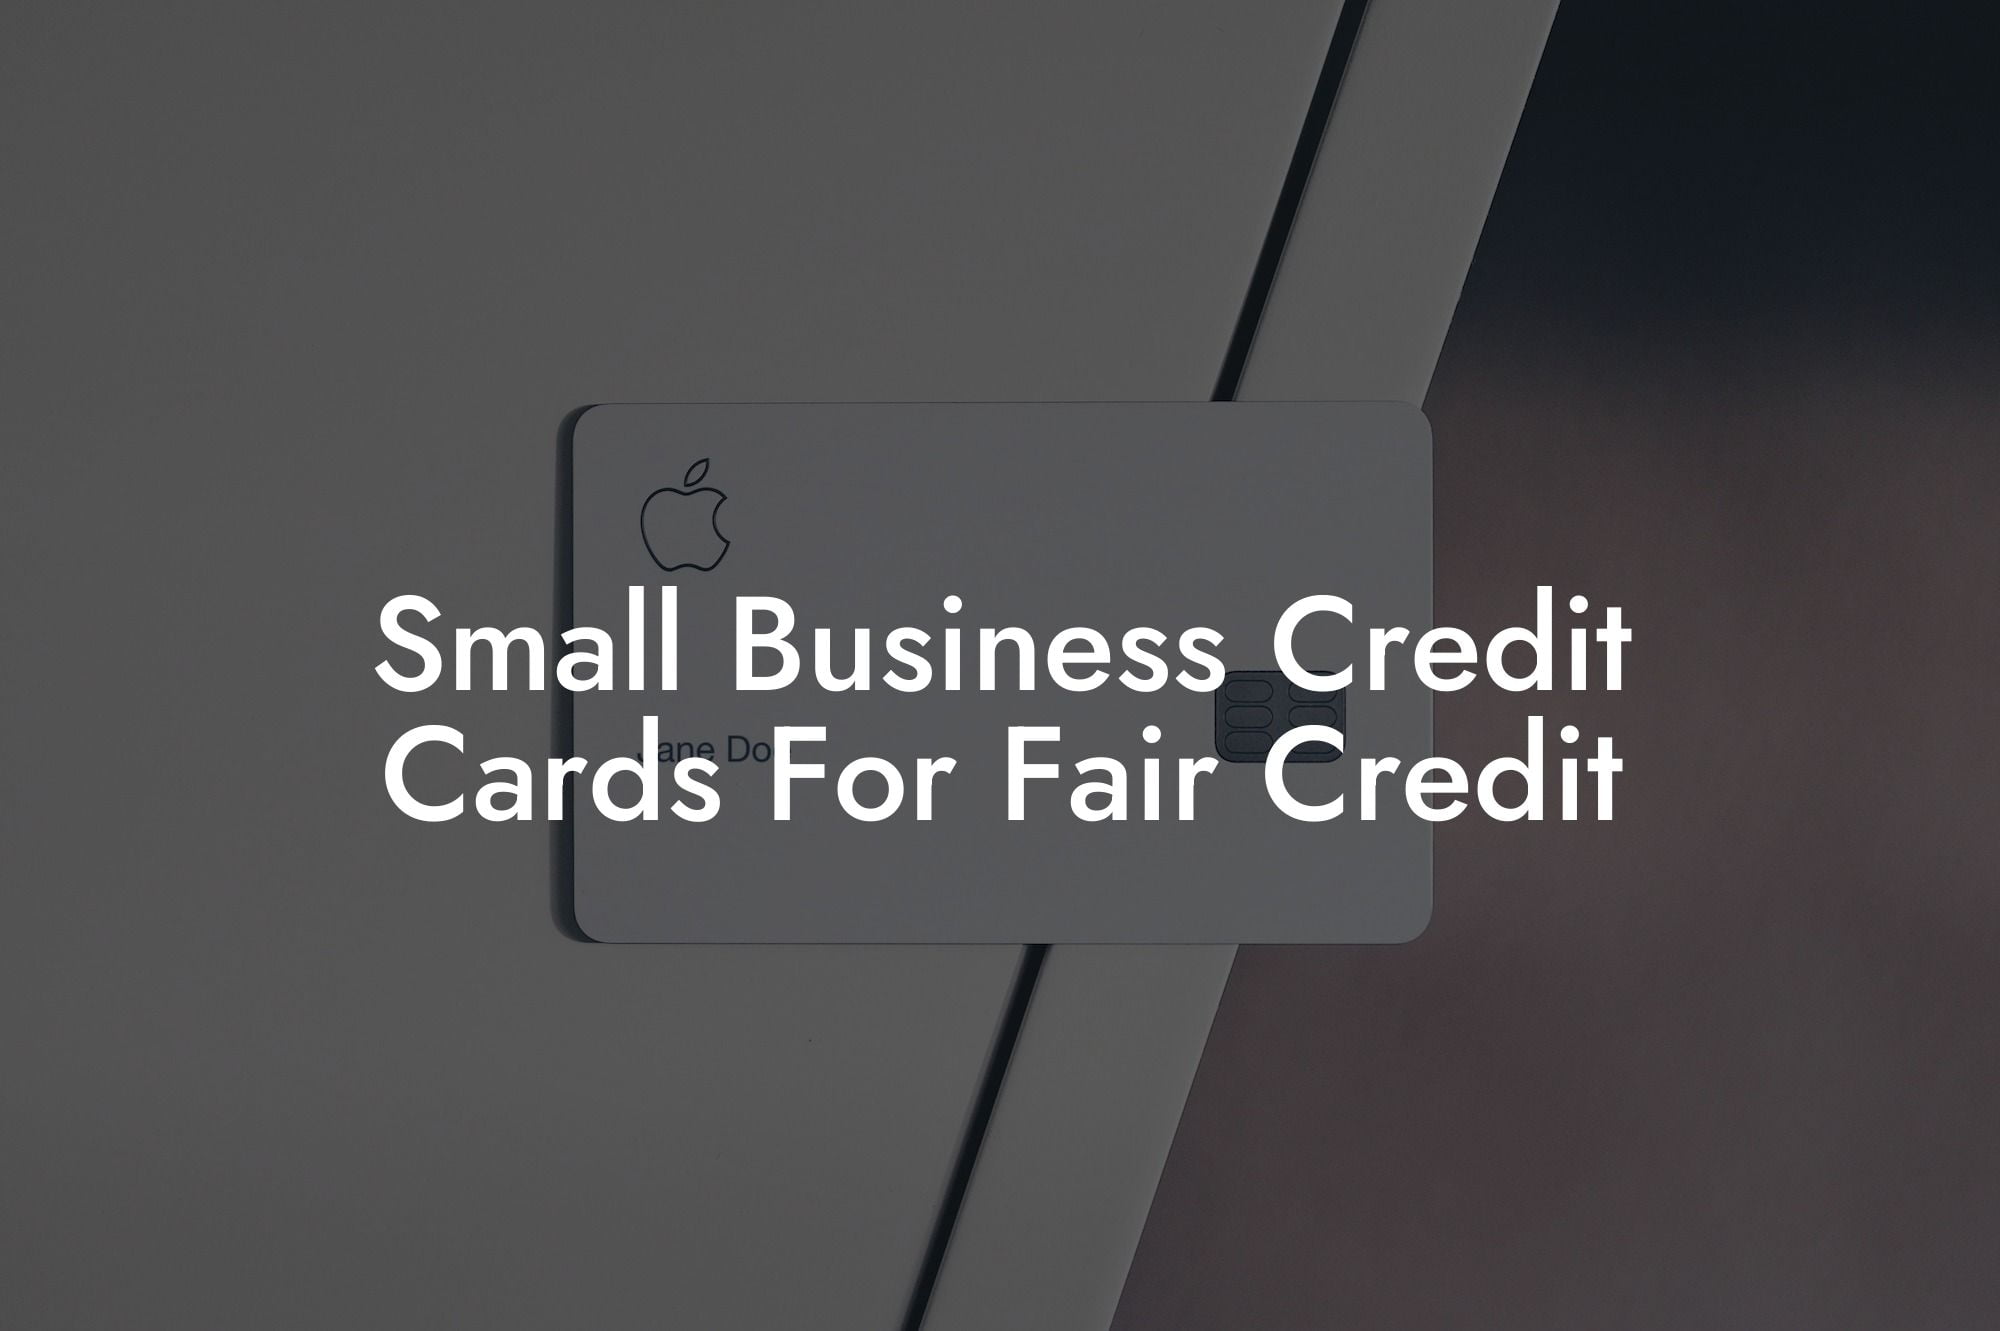 Small Business Credit Cards For Fair Credit